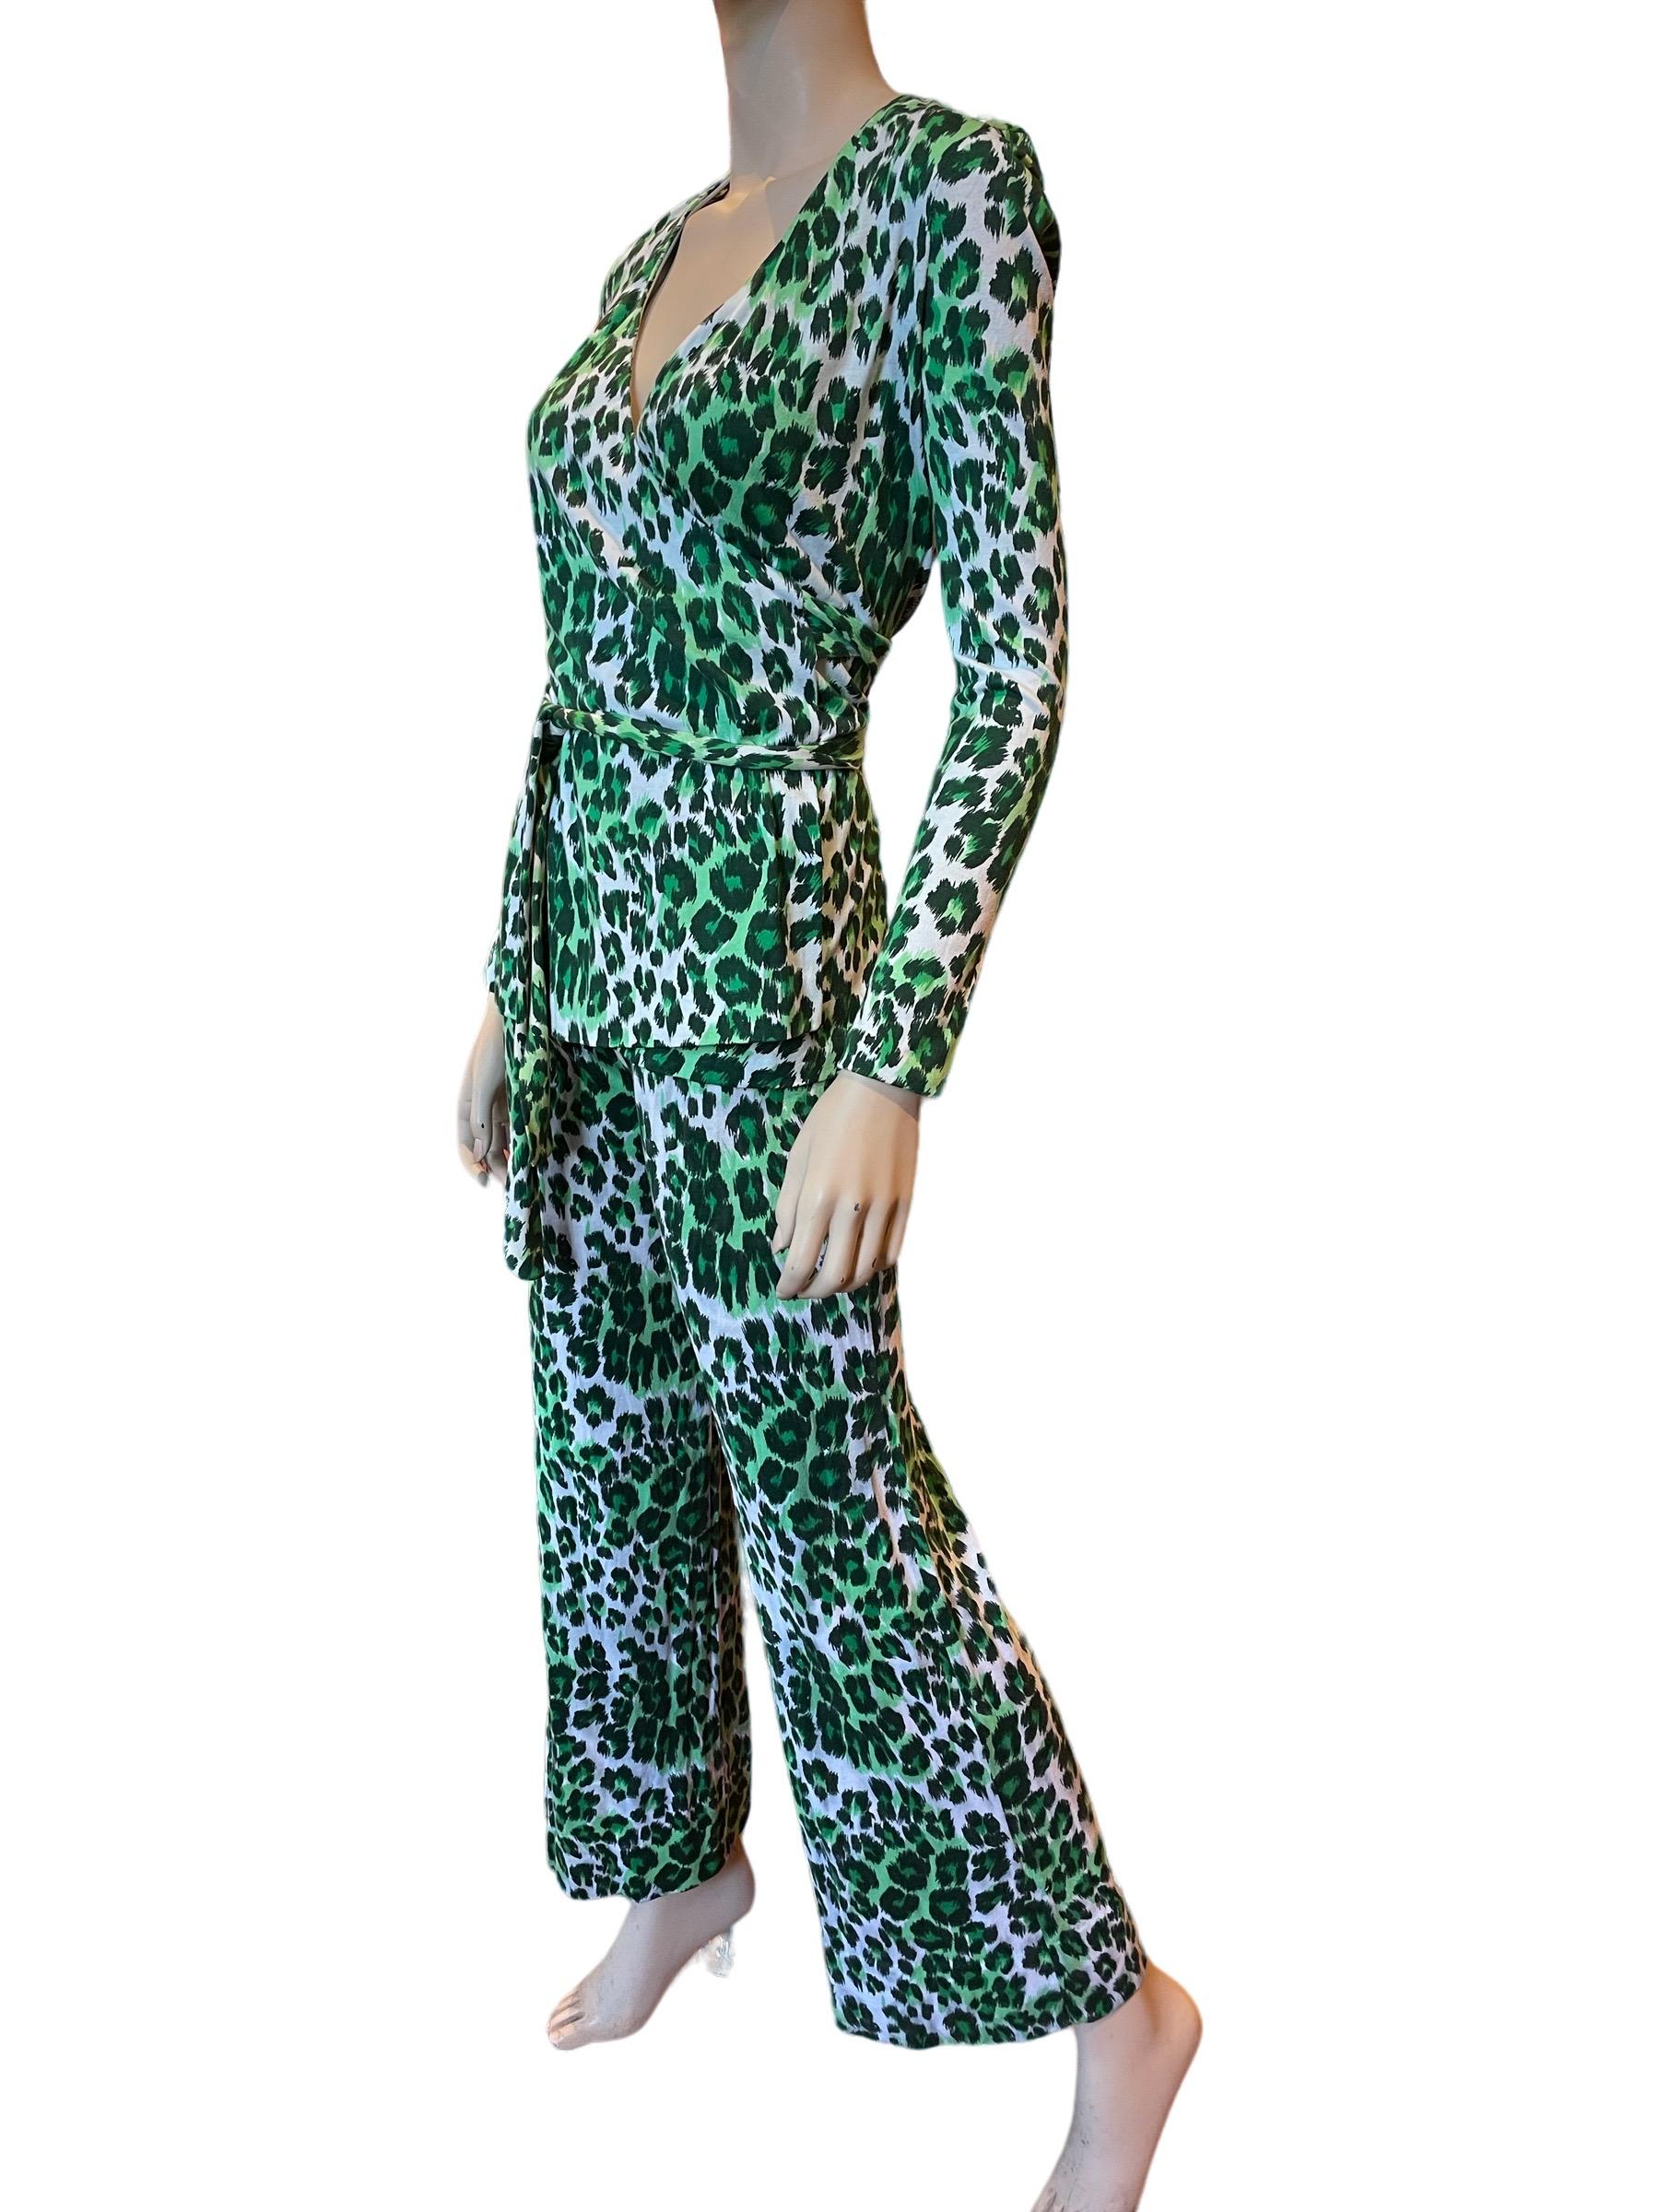 Diane Von Furstenberg late 70s green leopard print wrap blouse and pants 

Elastic Waistband 
Waist: 22-26”
Rise: 13”
Hips: 32-34”

Top:
Bust: 34”
Length: 26”

Slight discoloration on front of pants pictured, however long blouse does cover it 